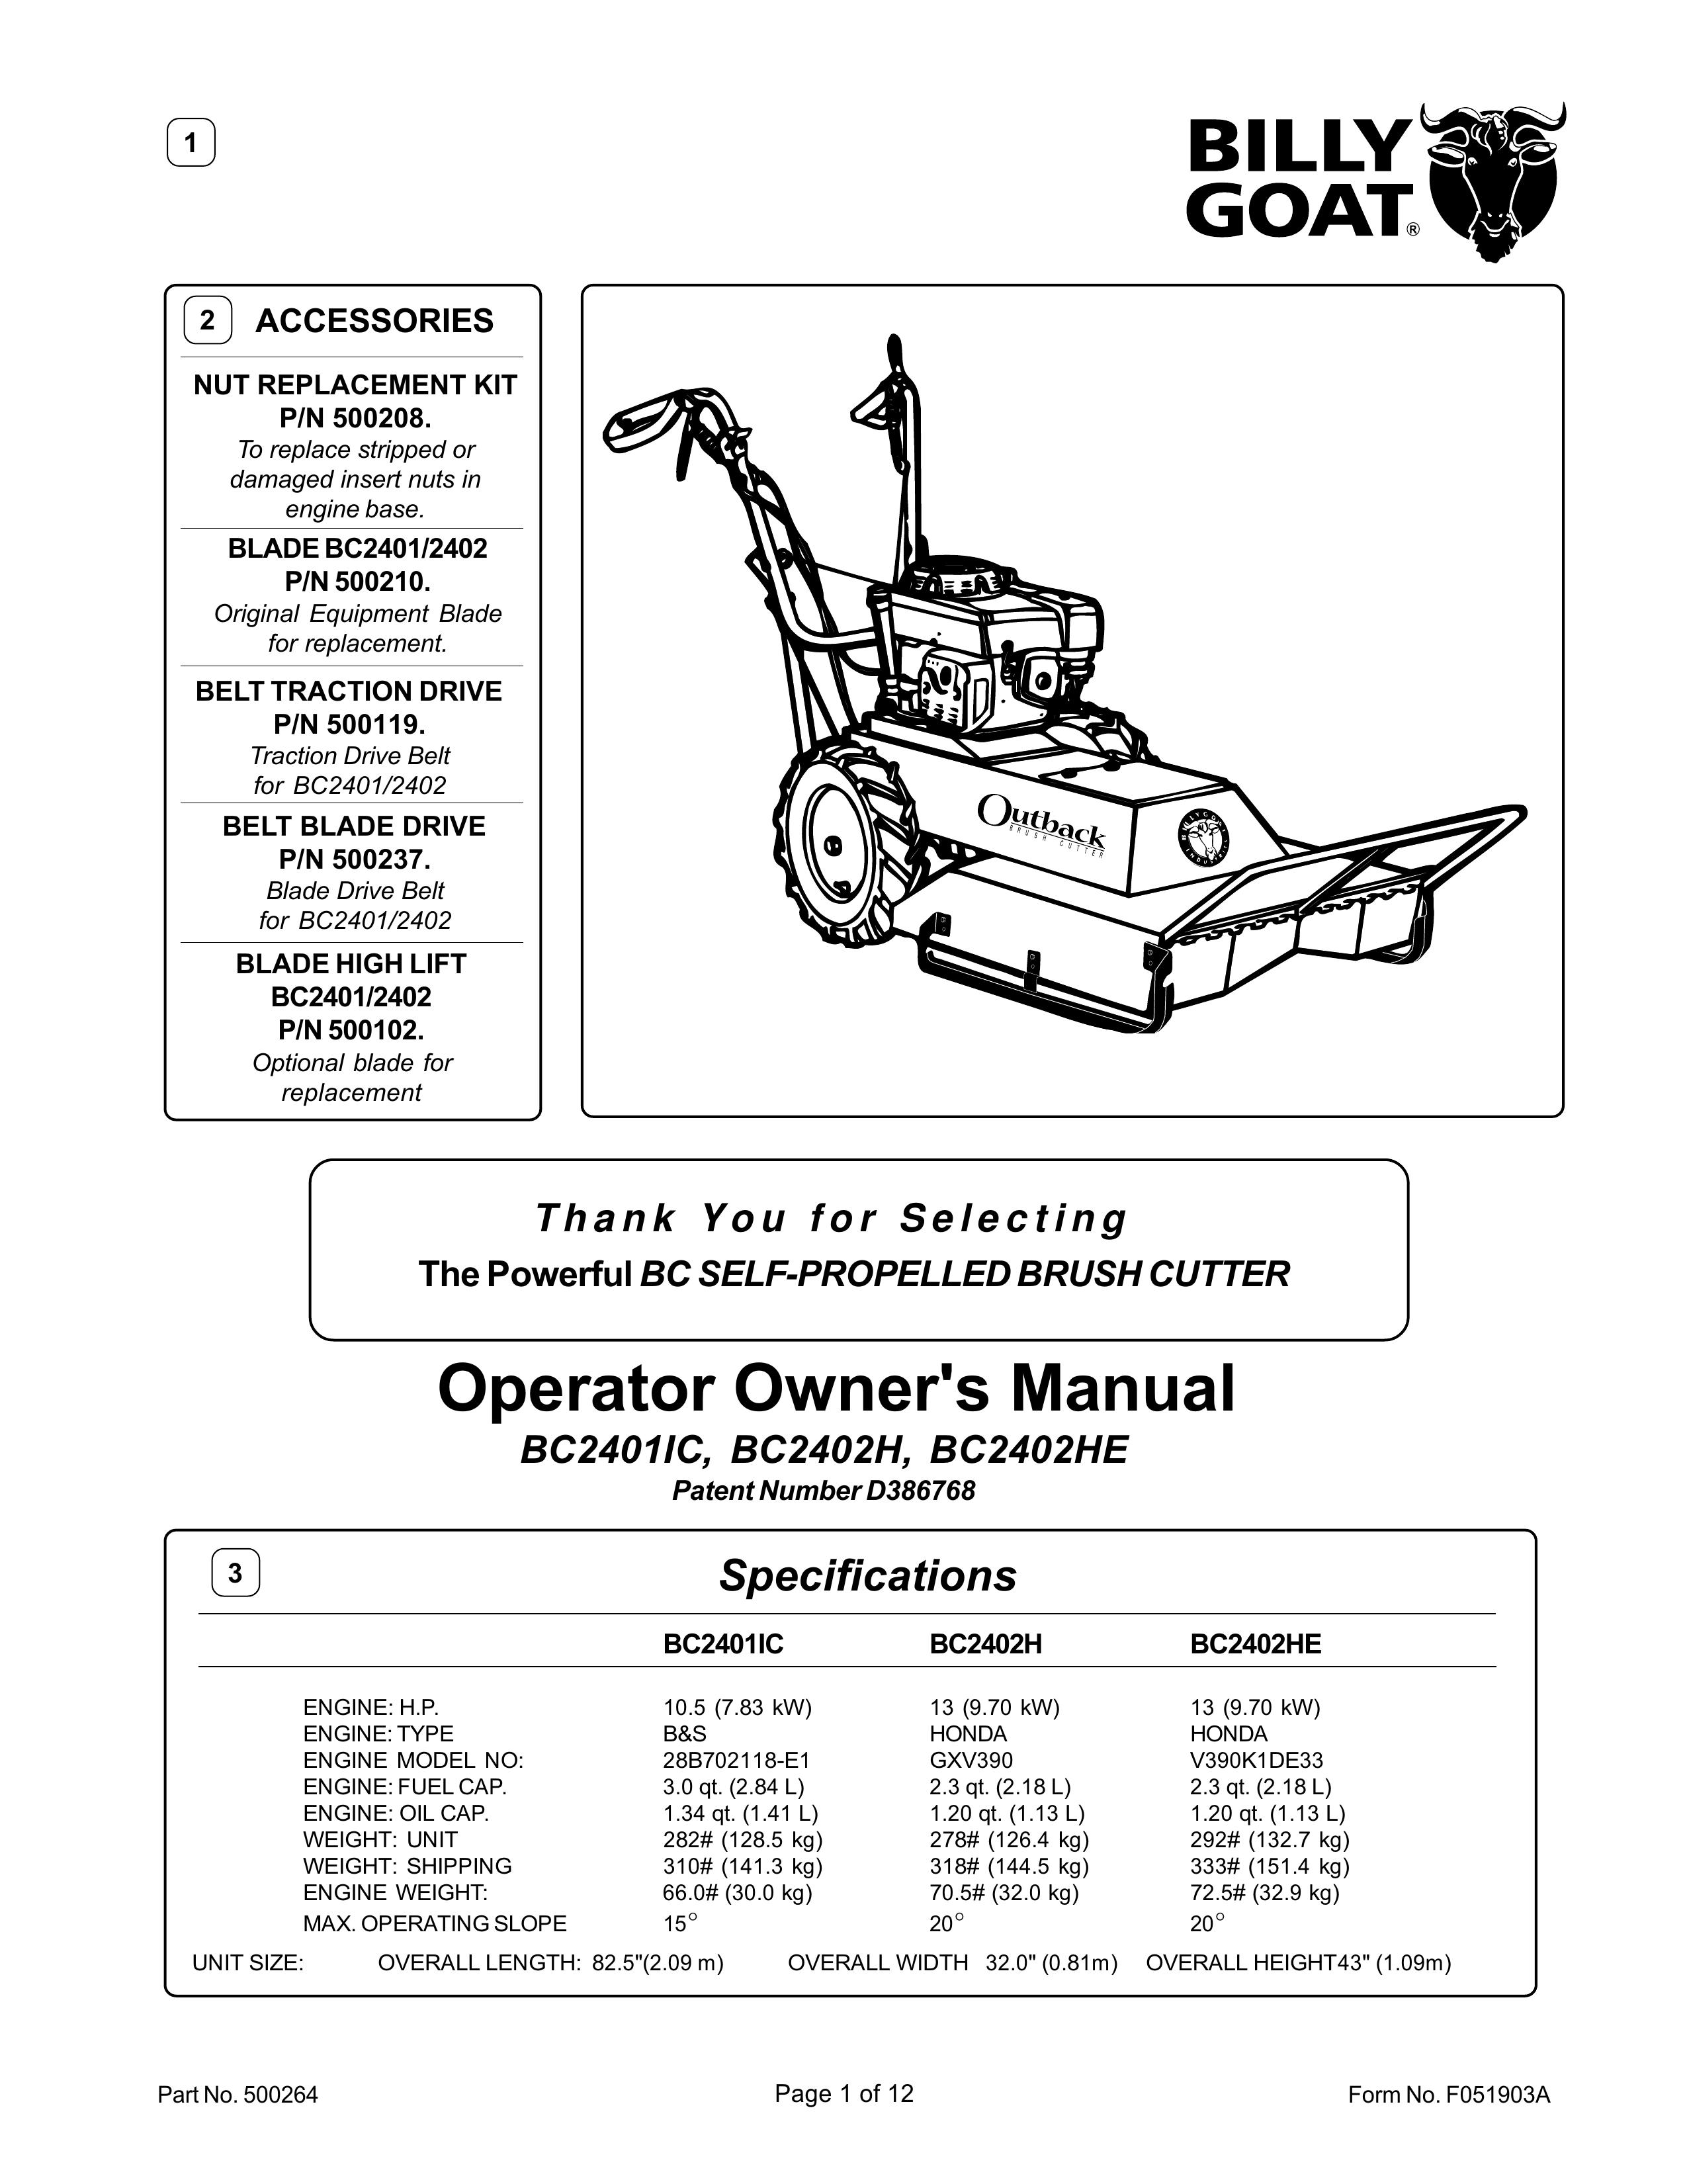 Billy Goat BC2402H Brush Cutter User Manual